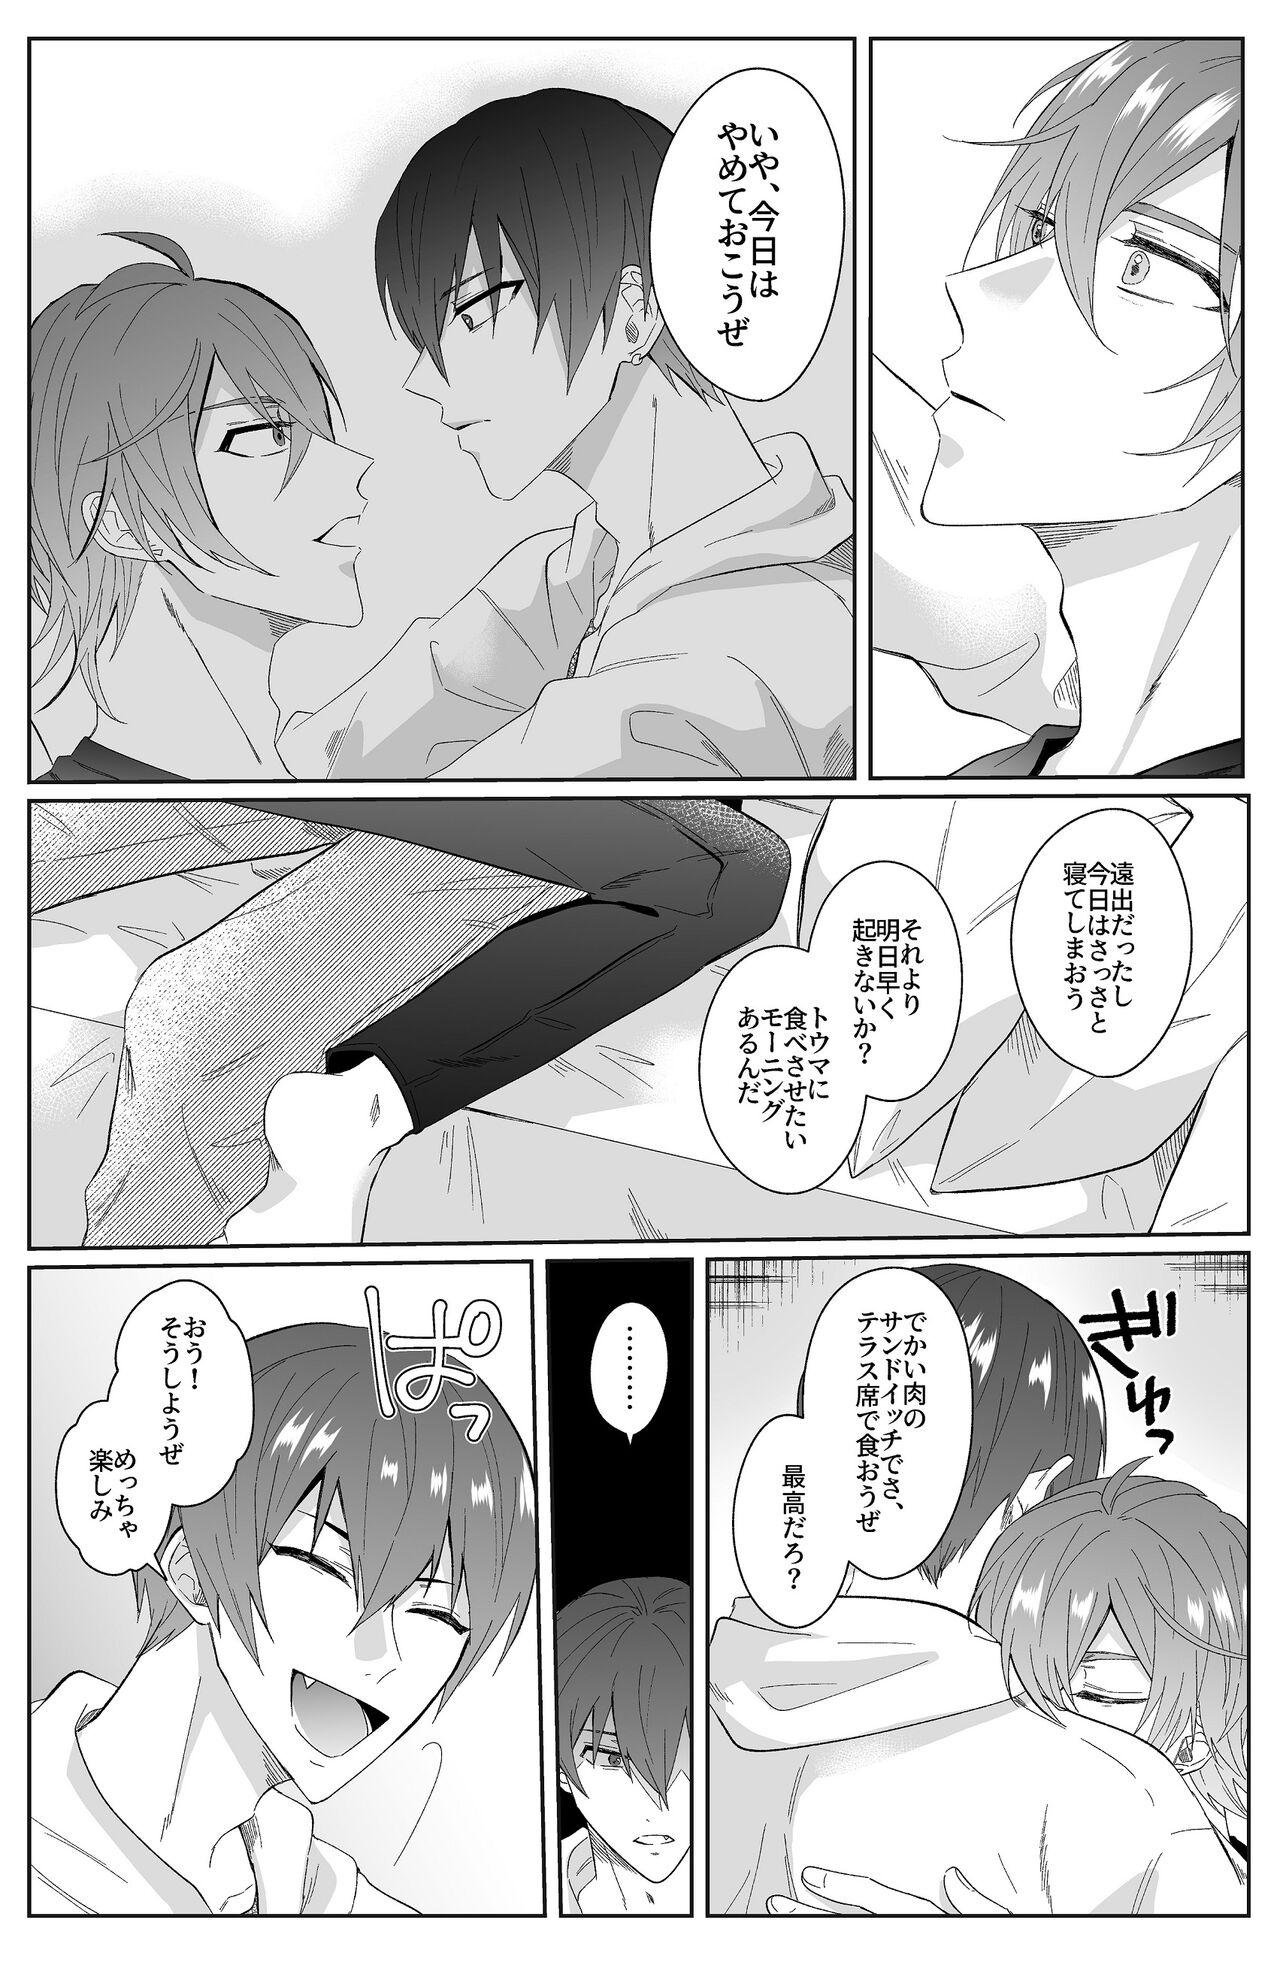 Facials Second Attempt - Idolish7 Nasty - Page 8